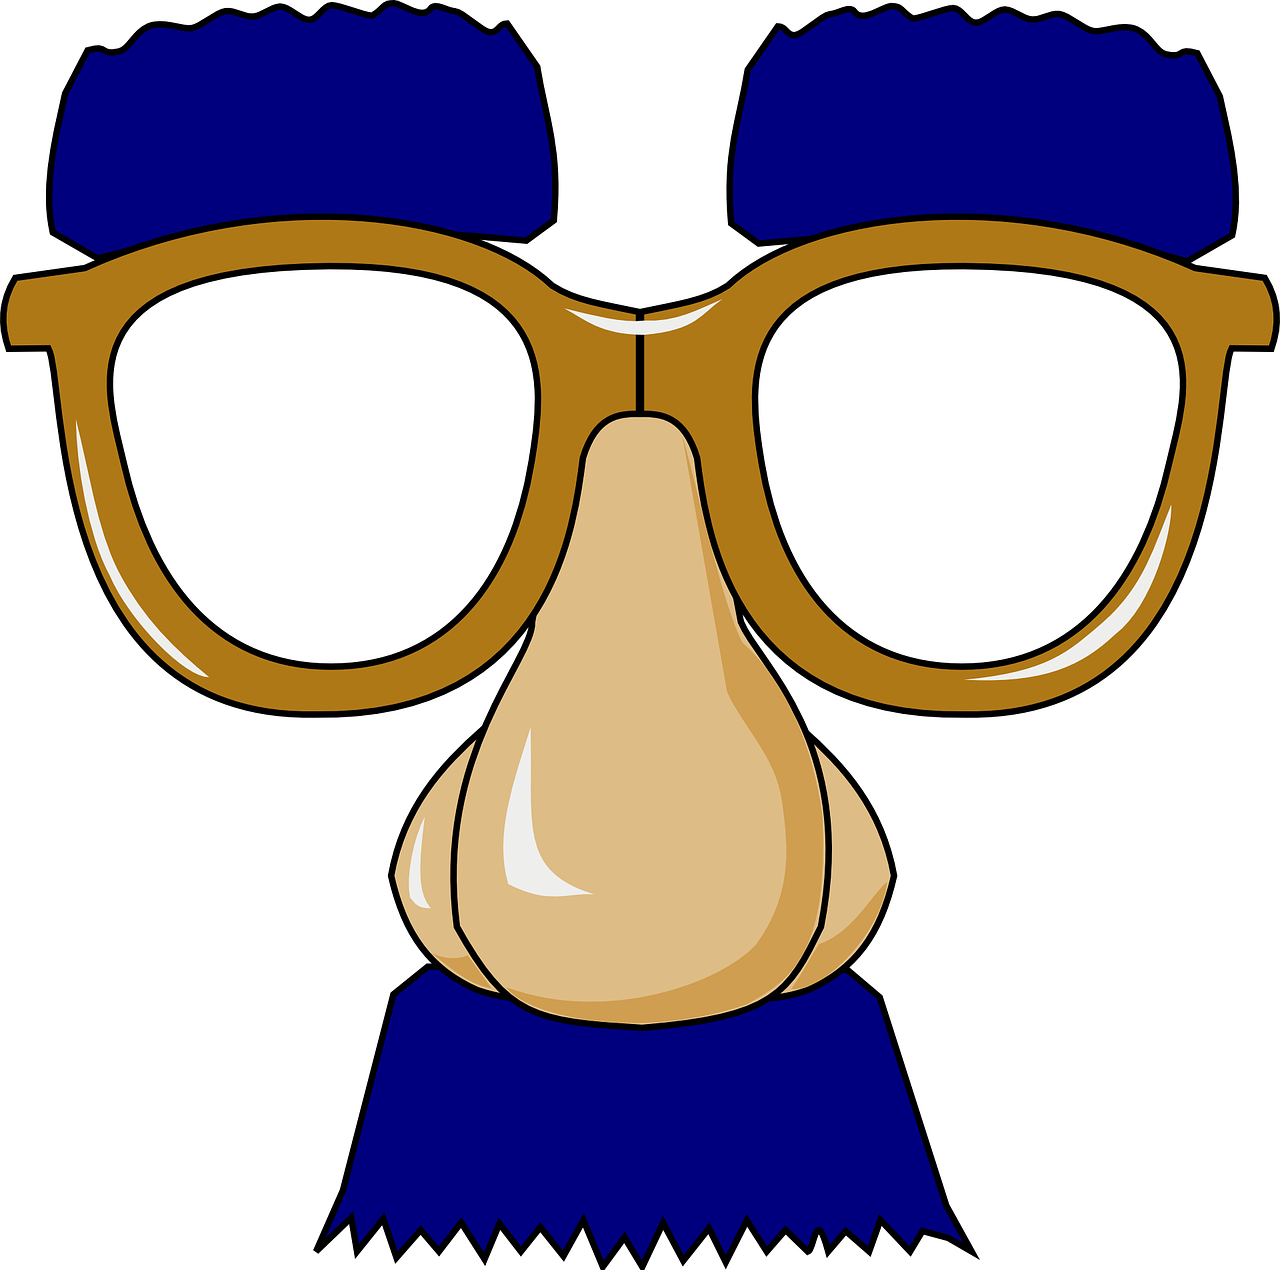 Image of a pair of Groucho Marx glasses with blue eyebrows and mustache.